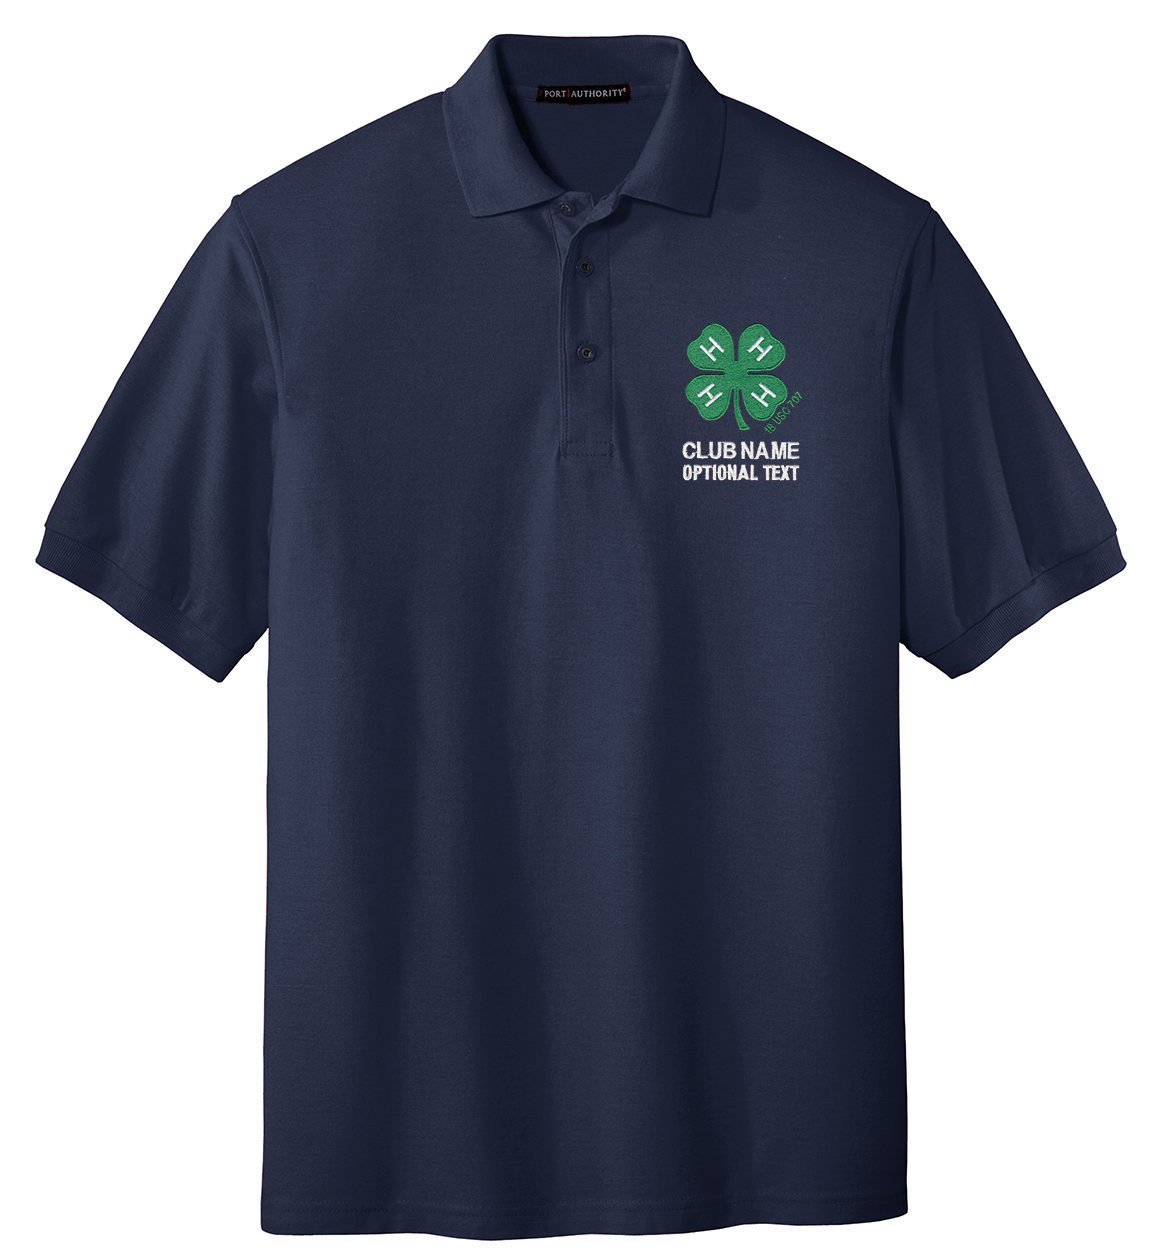 4-H Logo Embroidered Men's Polo - Navy, Large